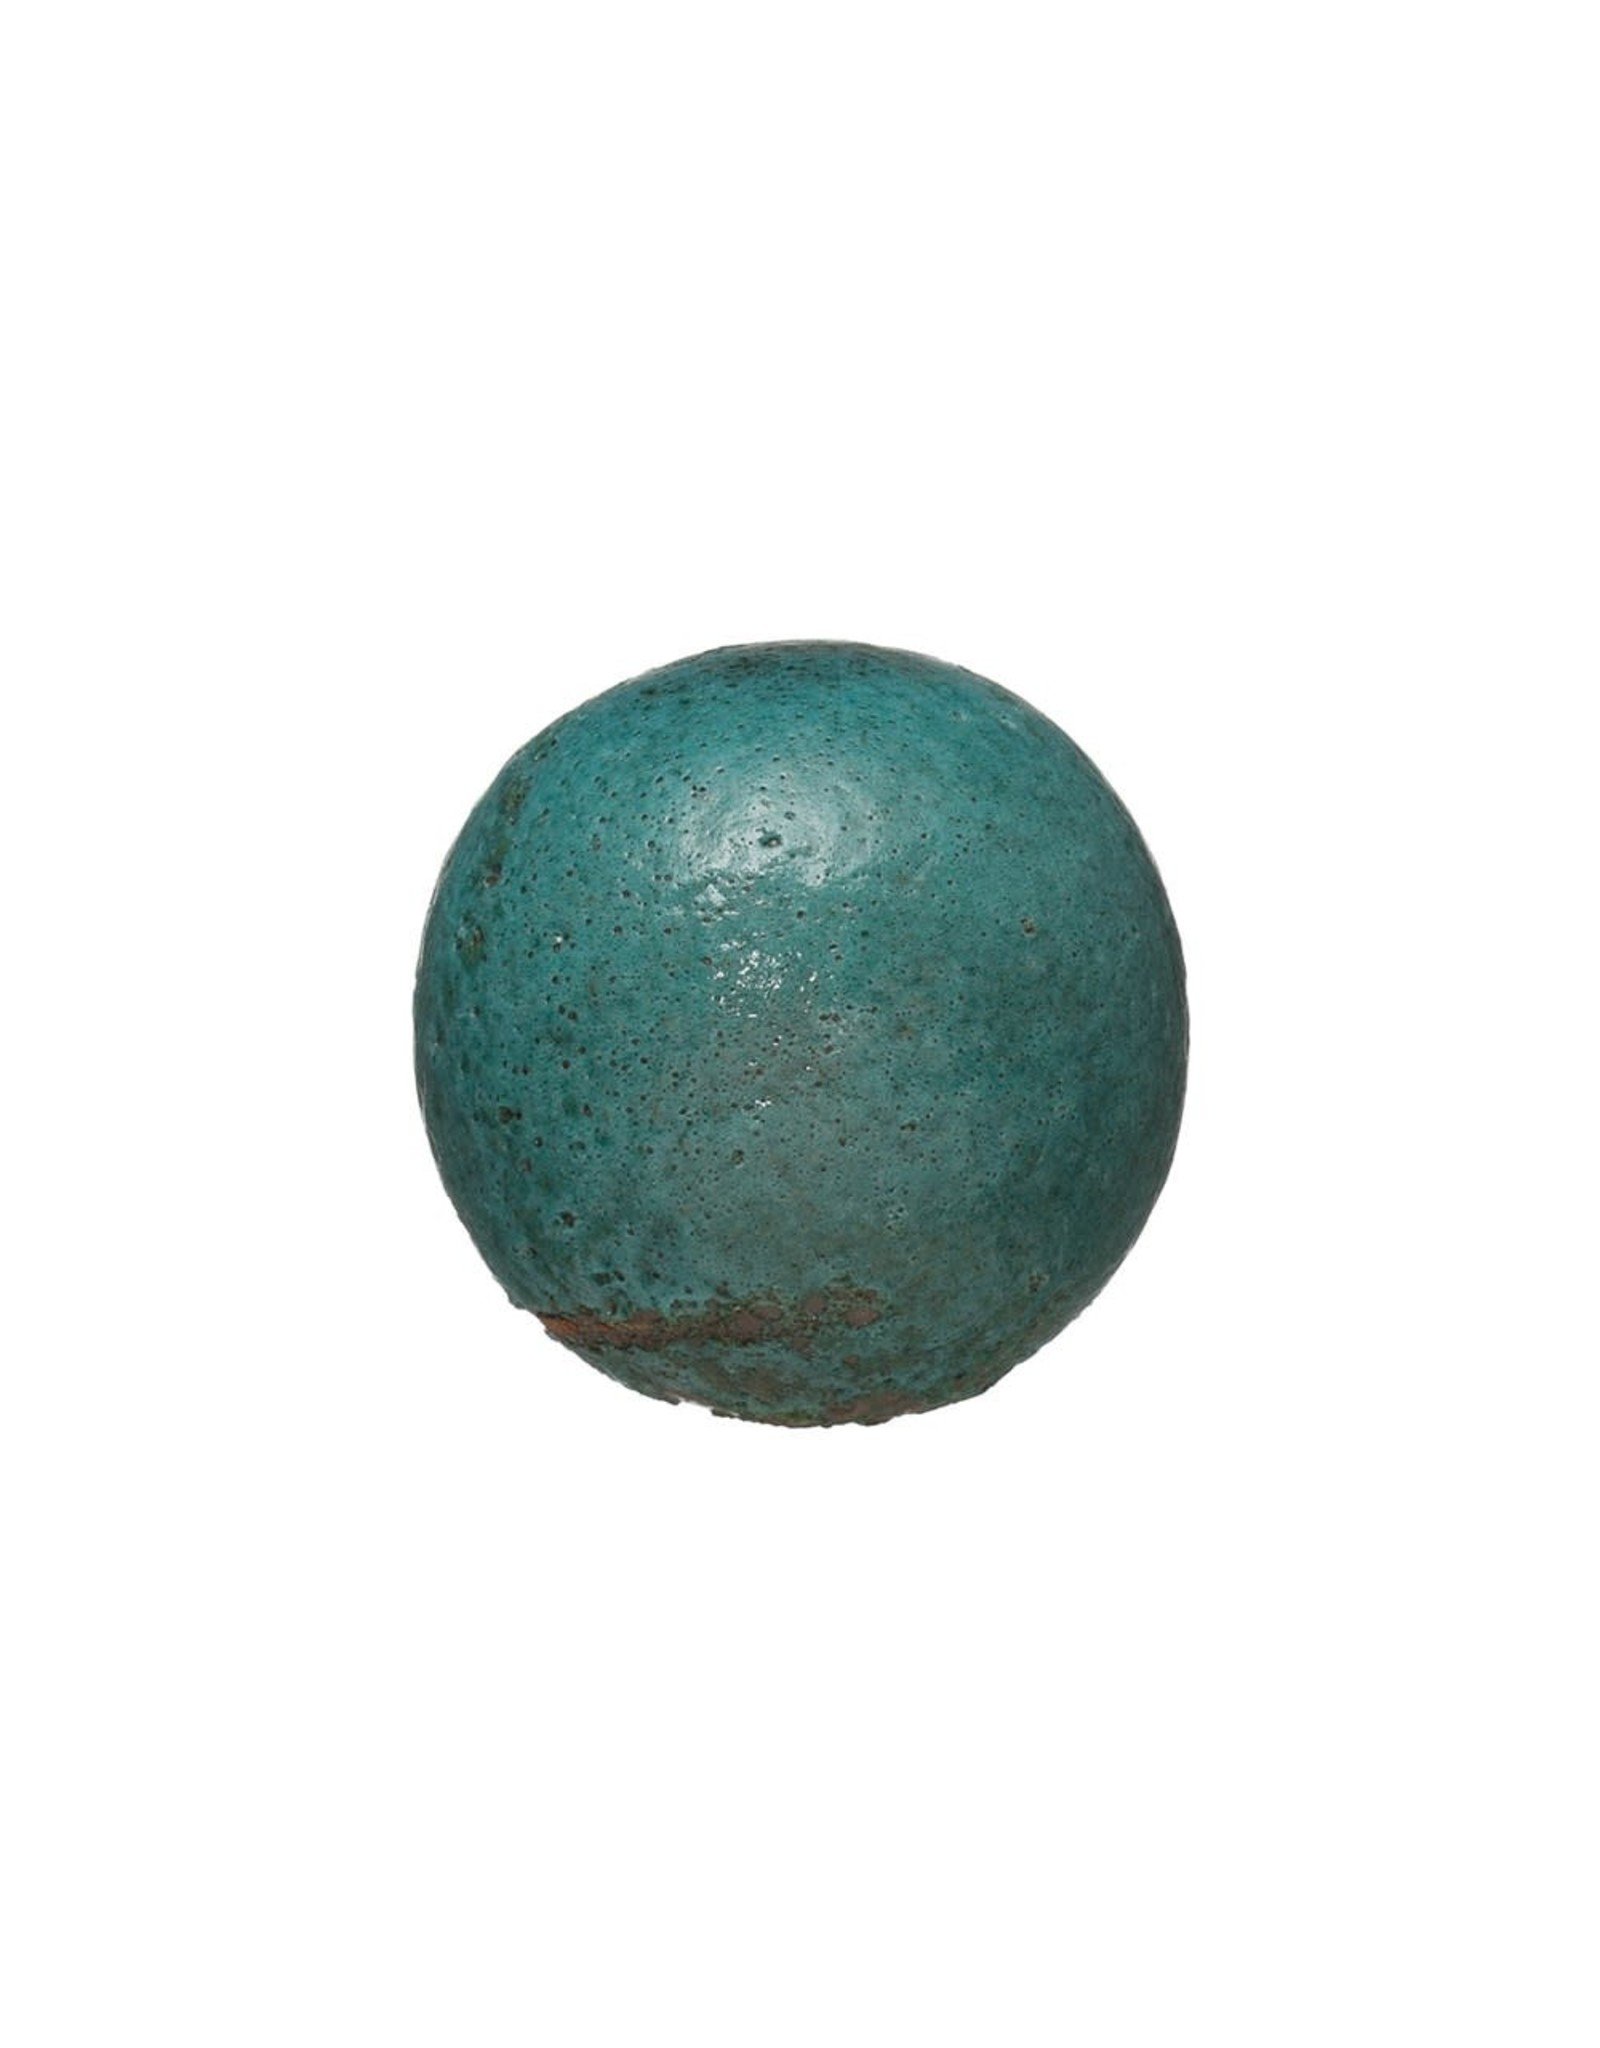 Creative Co-op 3 1/2" Round Teal Orb